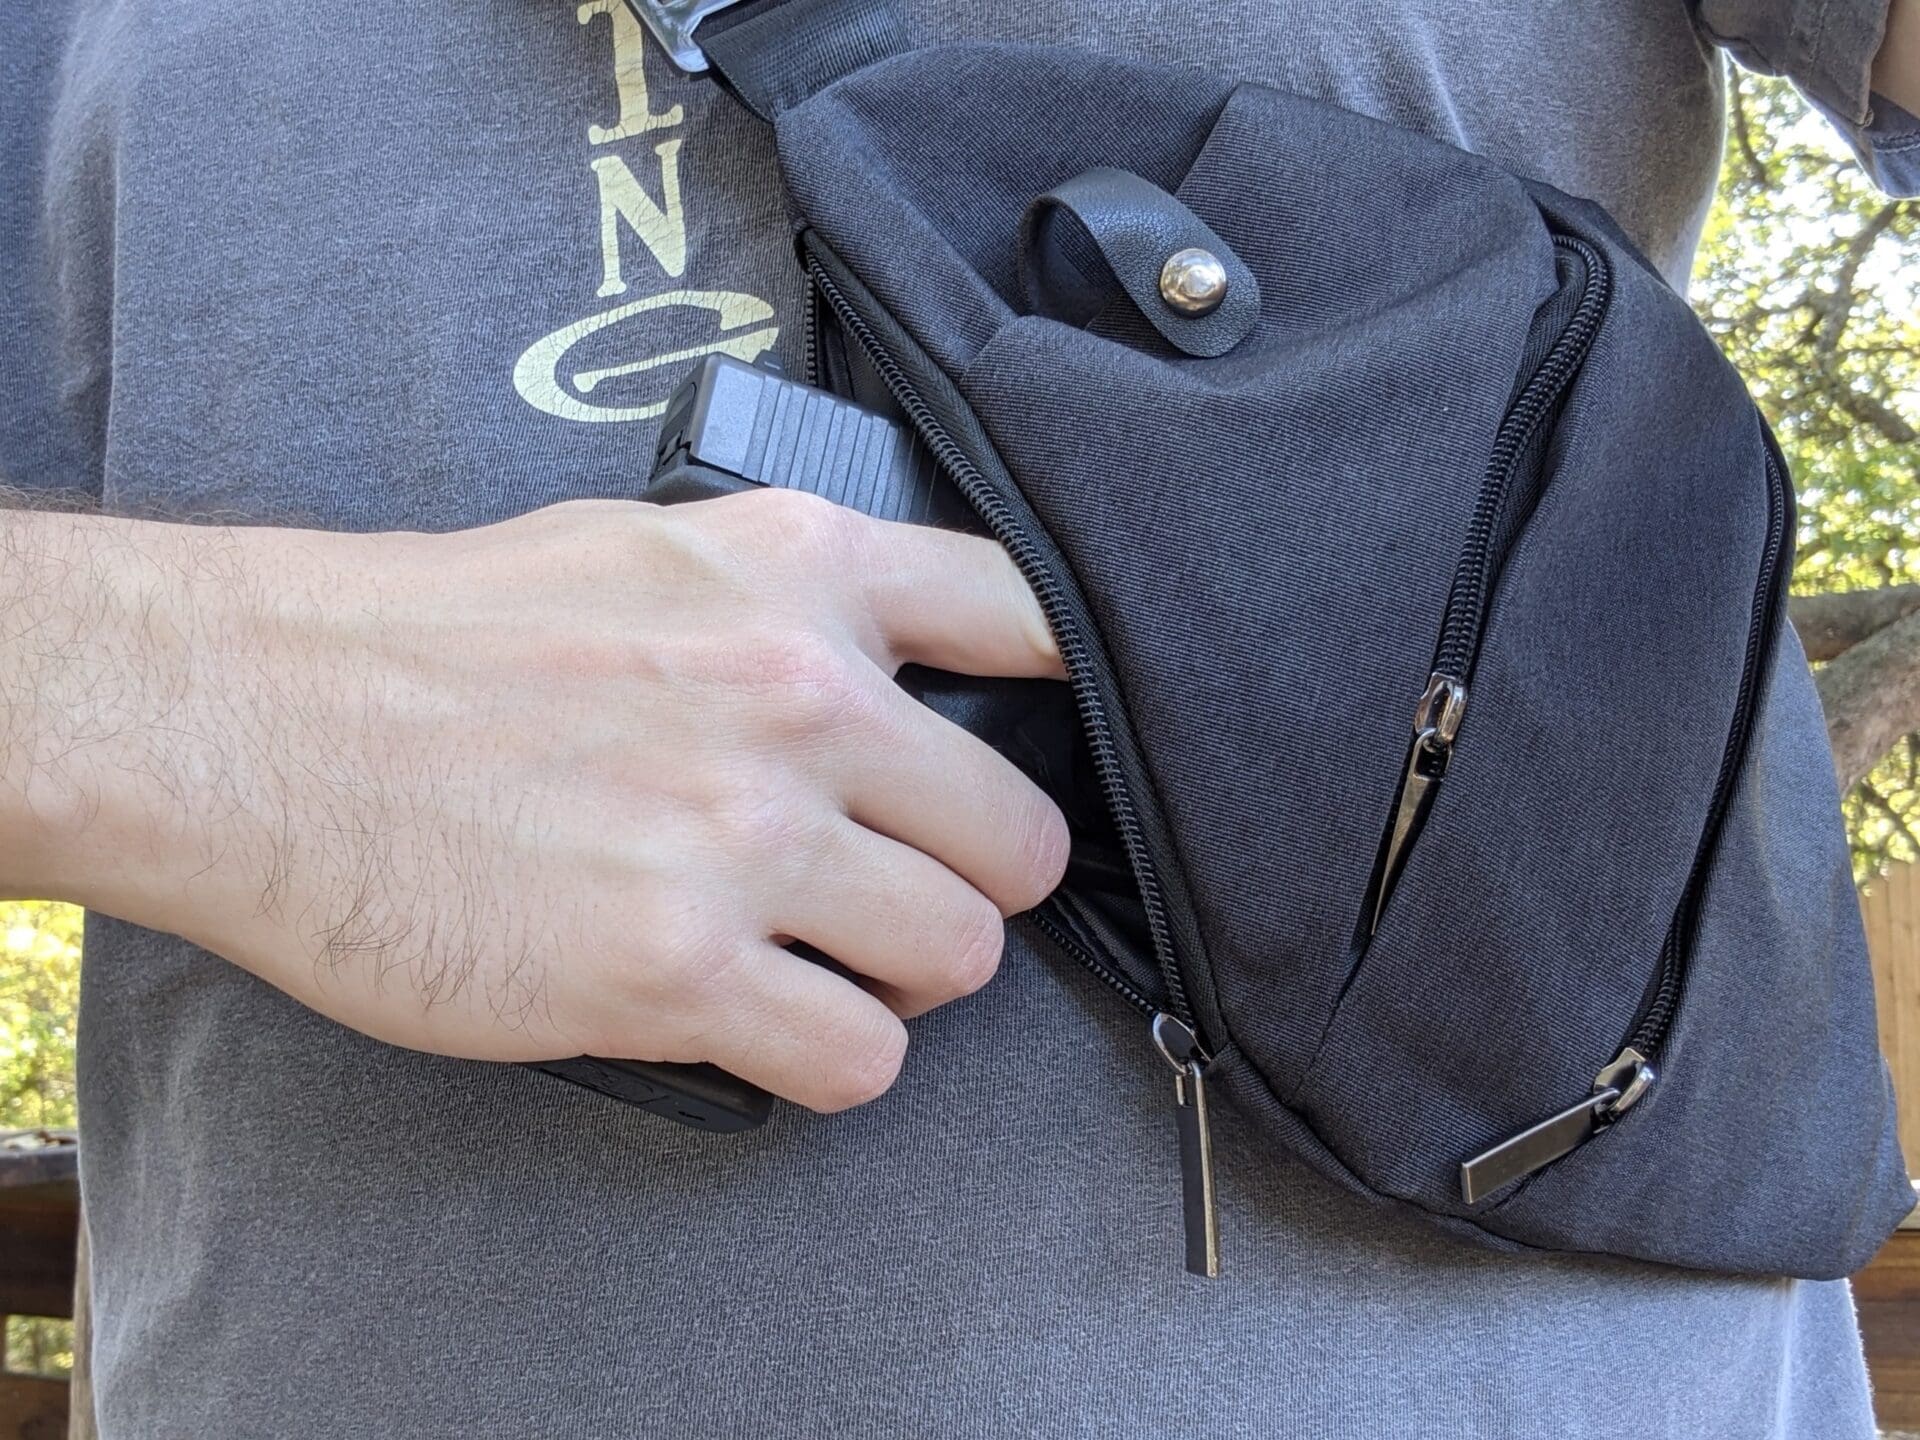 Stealth Daily Anti-Theft Crossbody Sling Bag